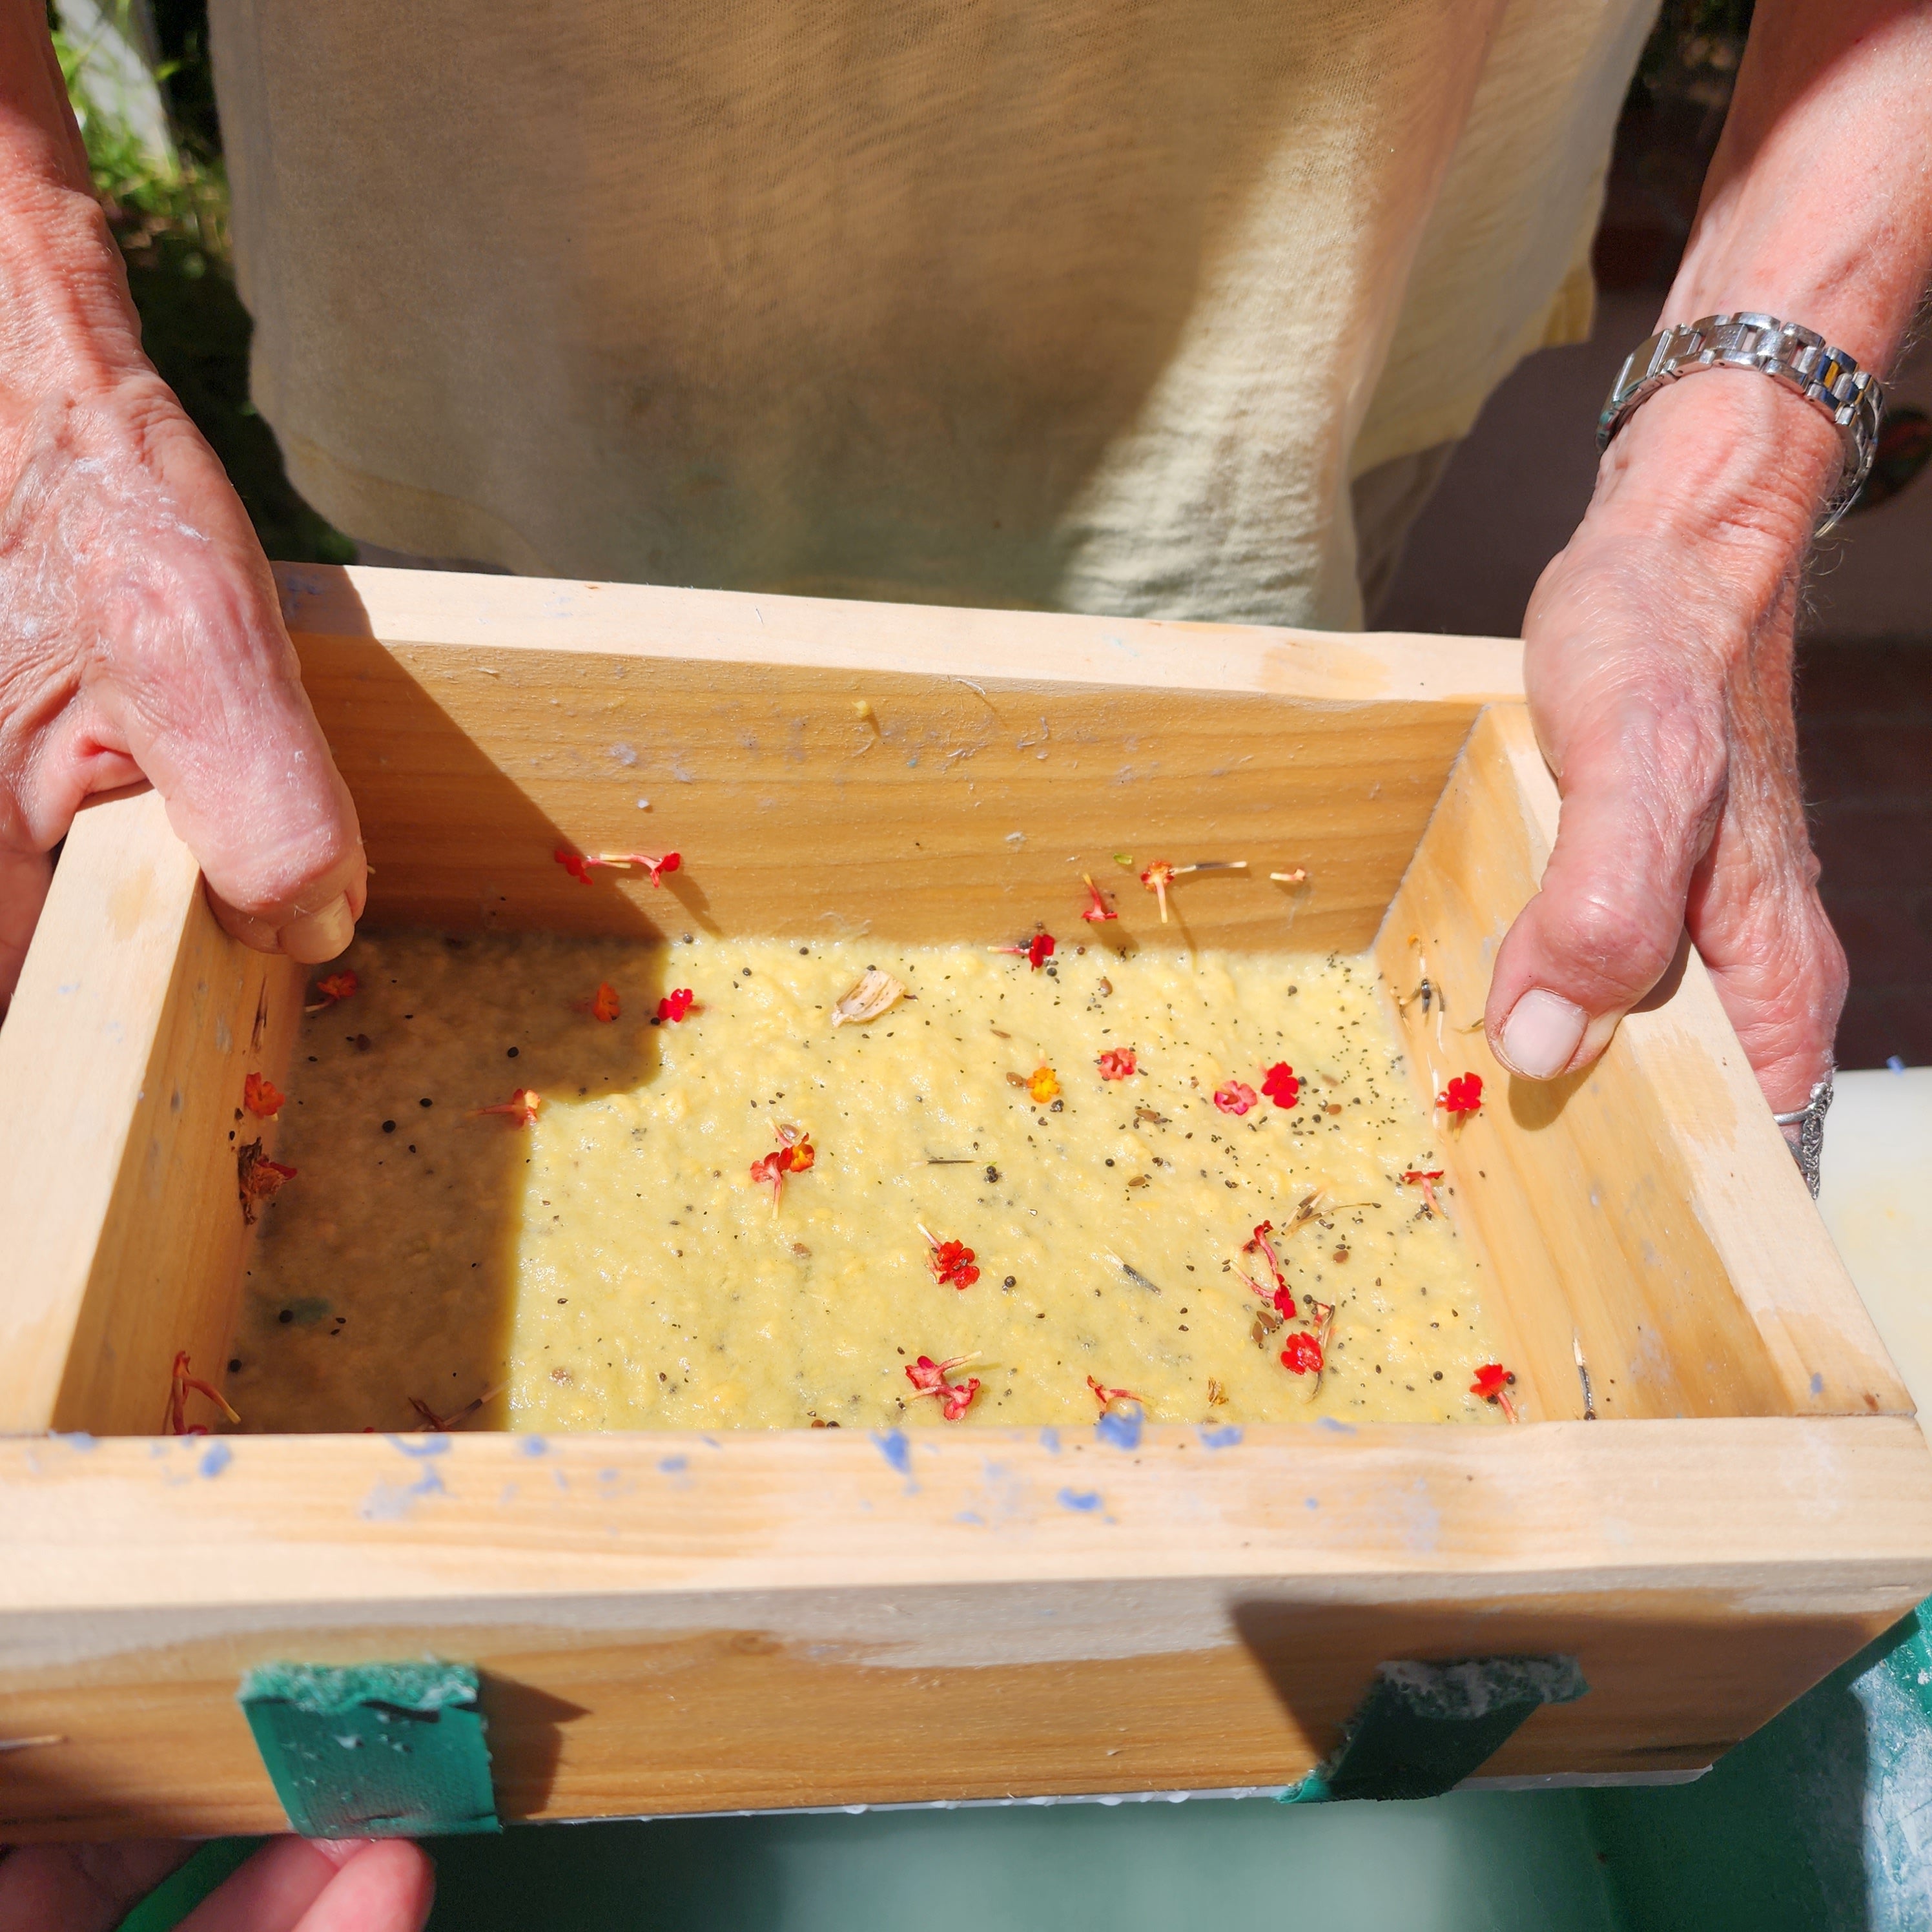 Workshop - Papermaking with Barbara Booth - Sunday, March 10th, 2024